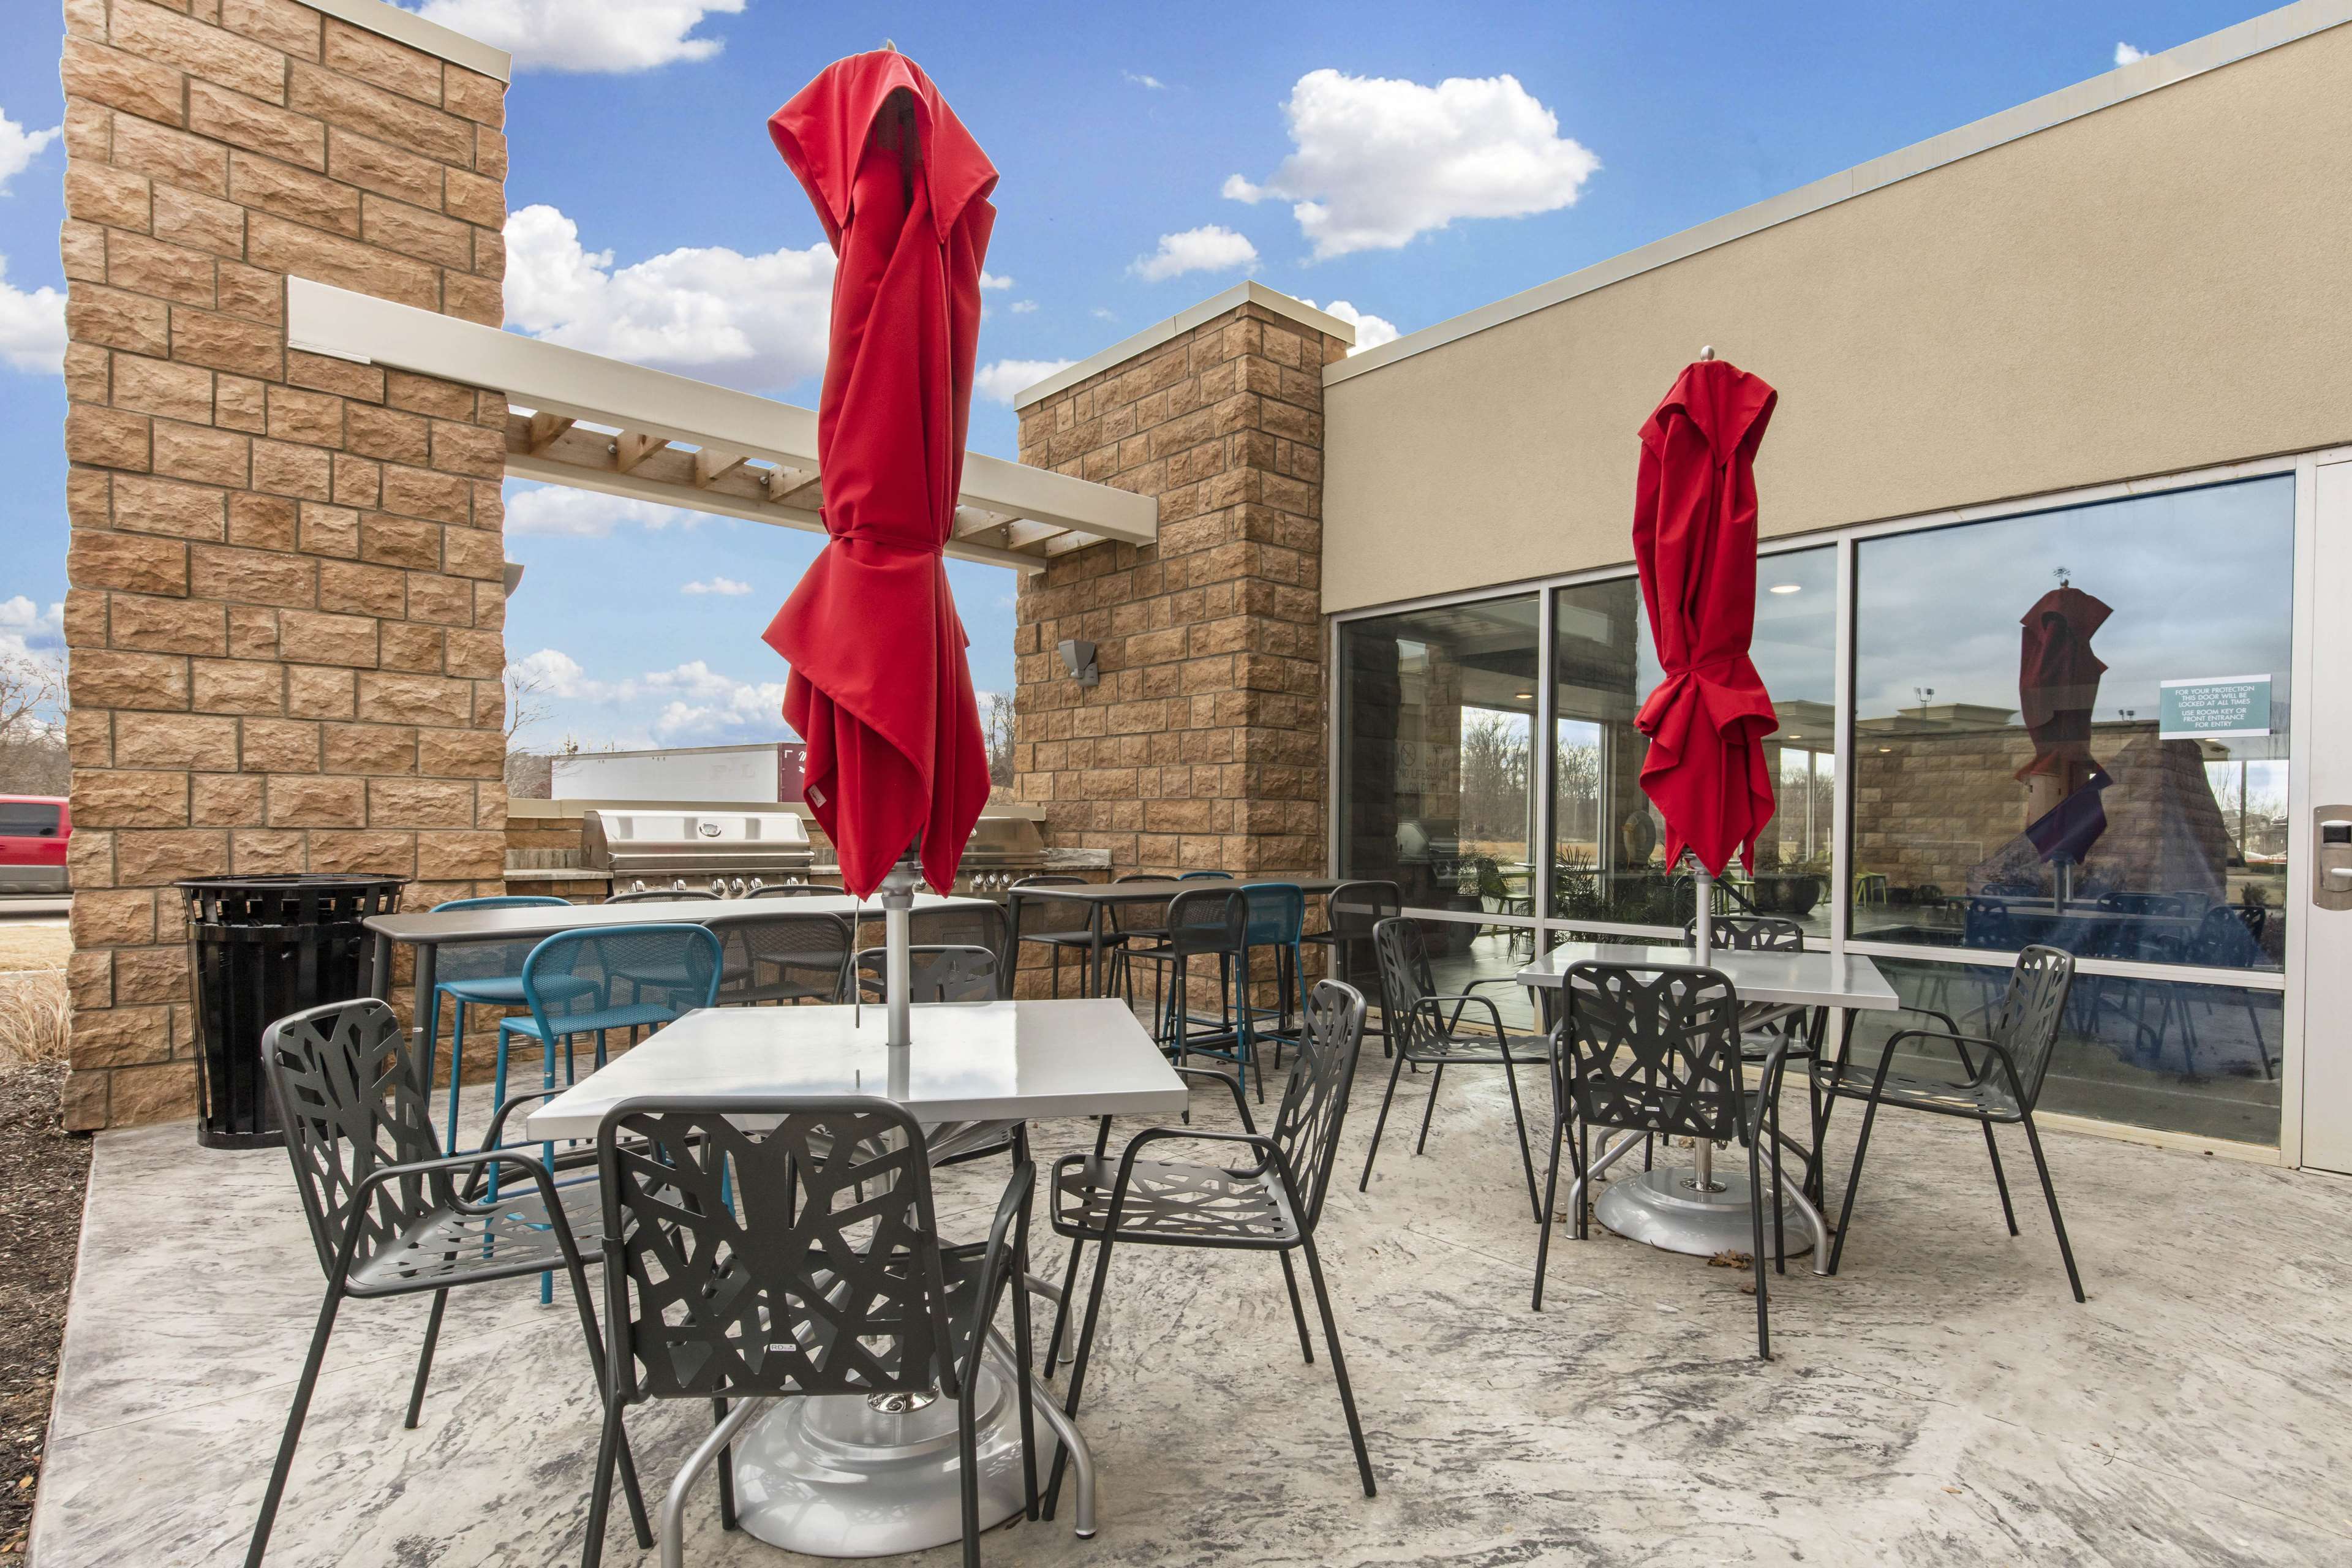 Home2 Suites by Hilton Olive Branch Photo